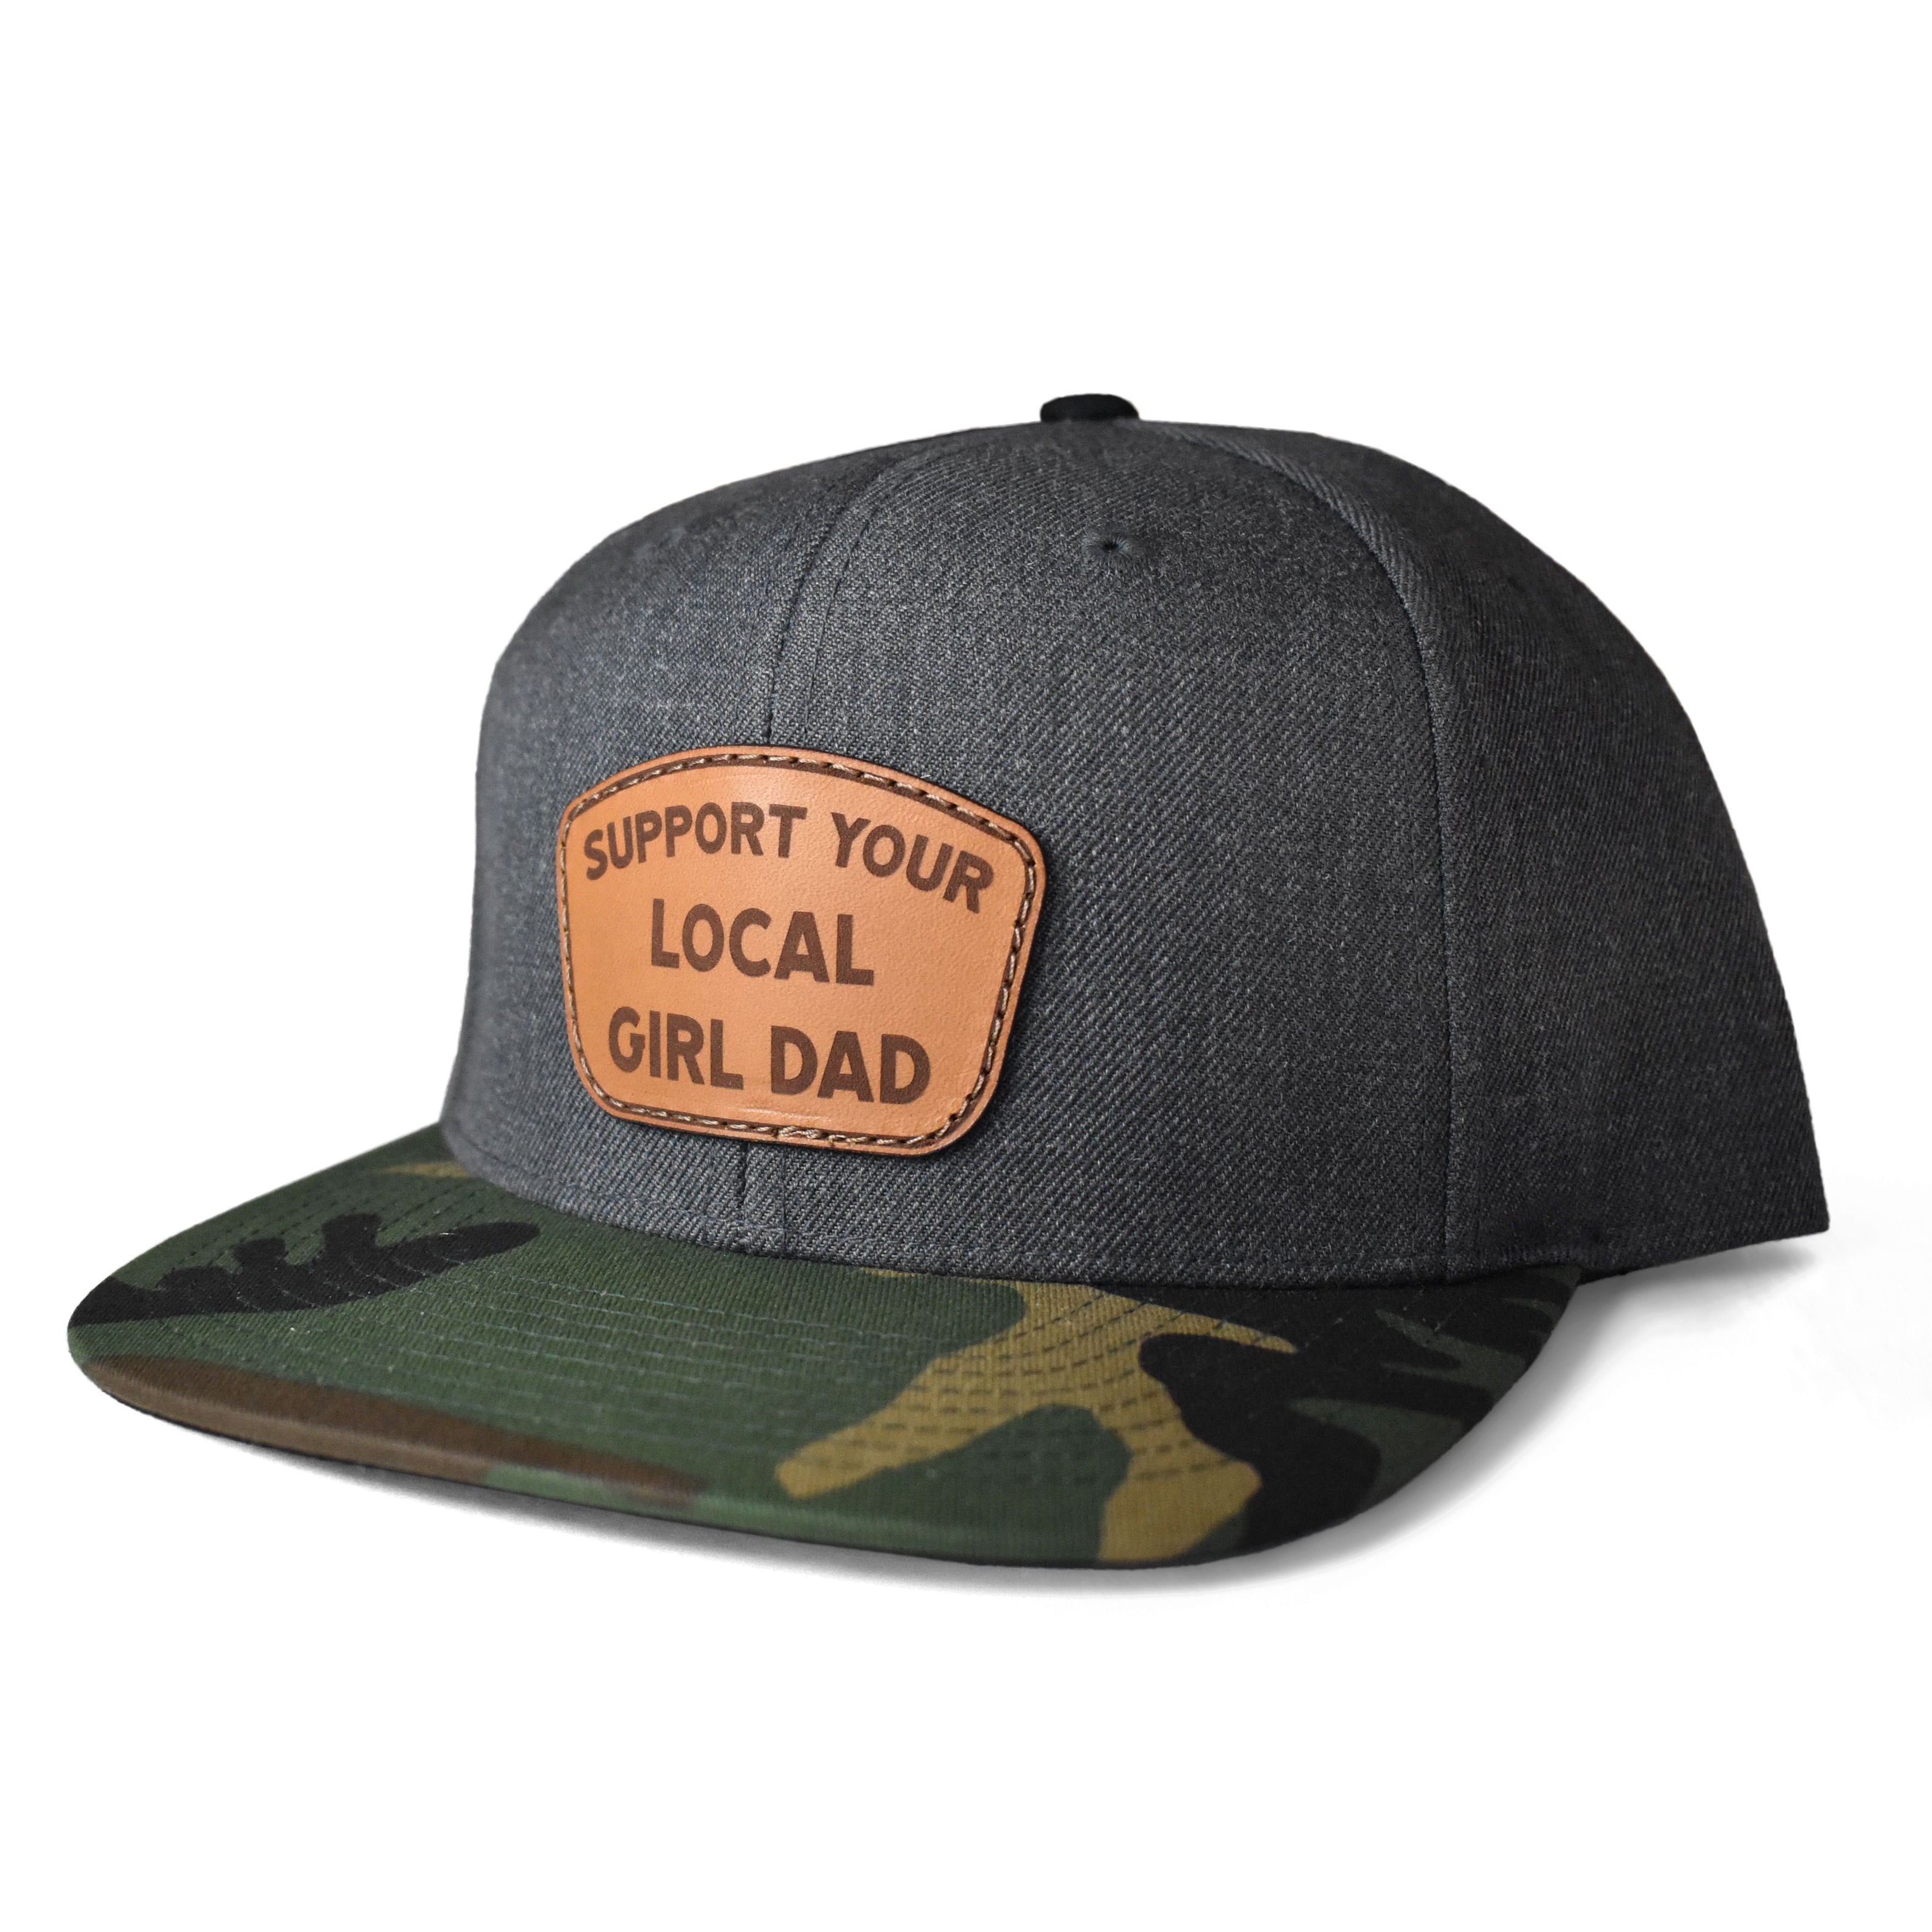 Support Your Local Girl Dad Leather Patch Hat (Charcoal/Camo Bill) - FLCHC